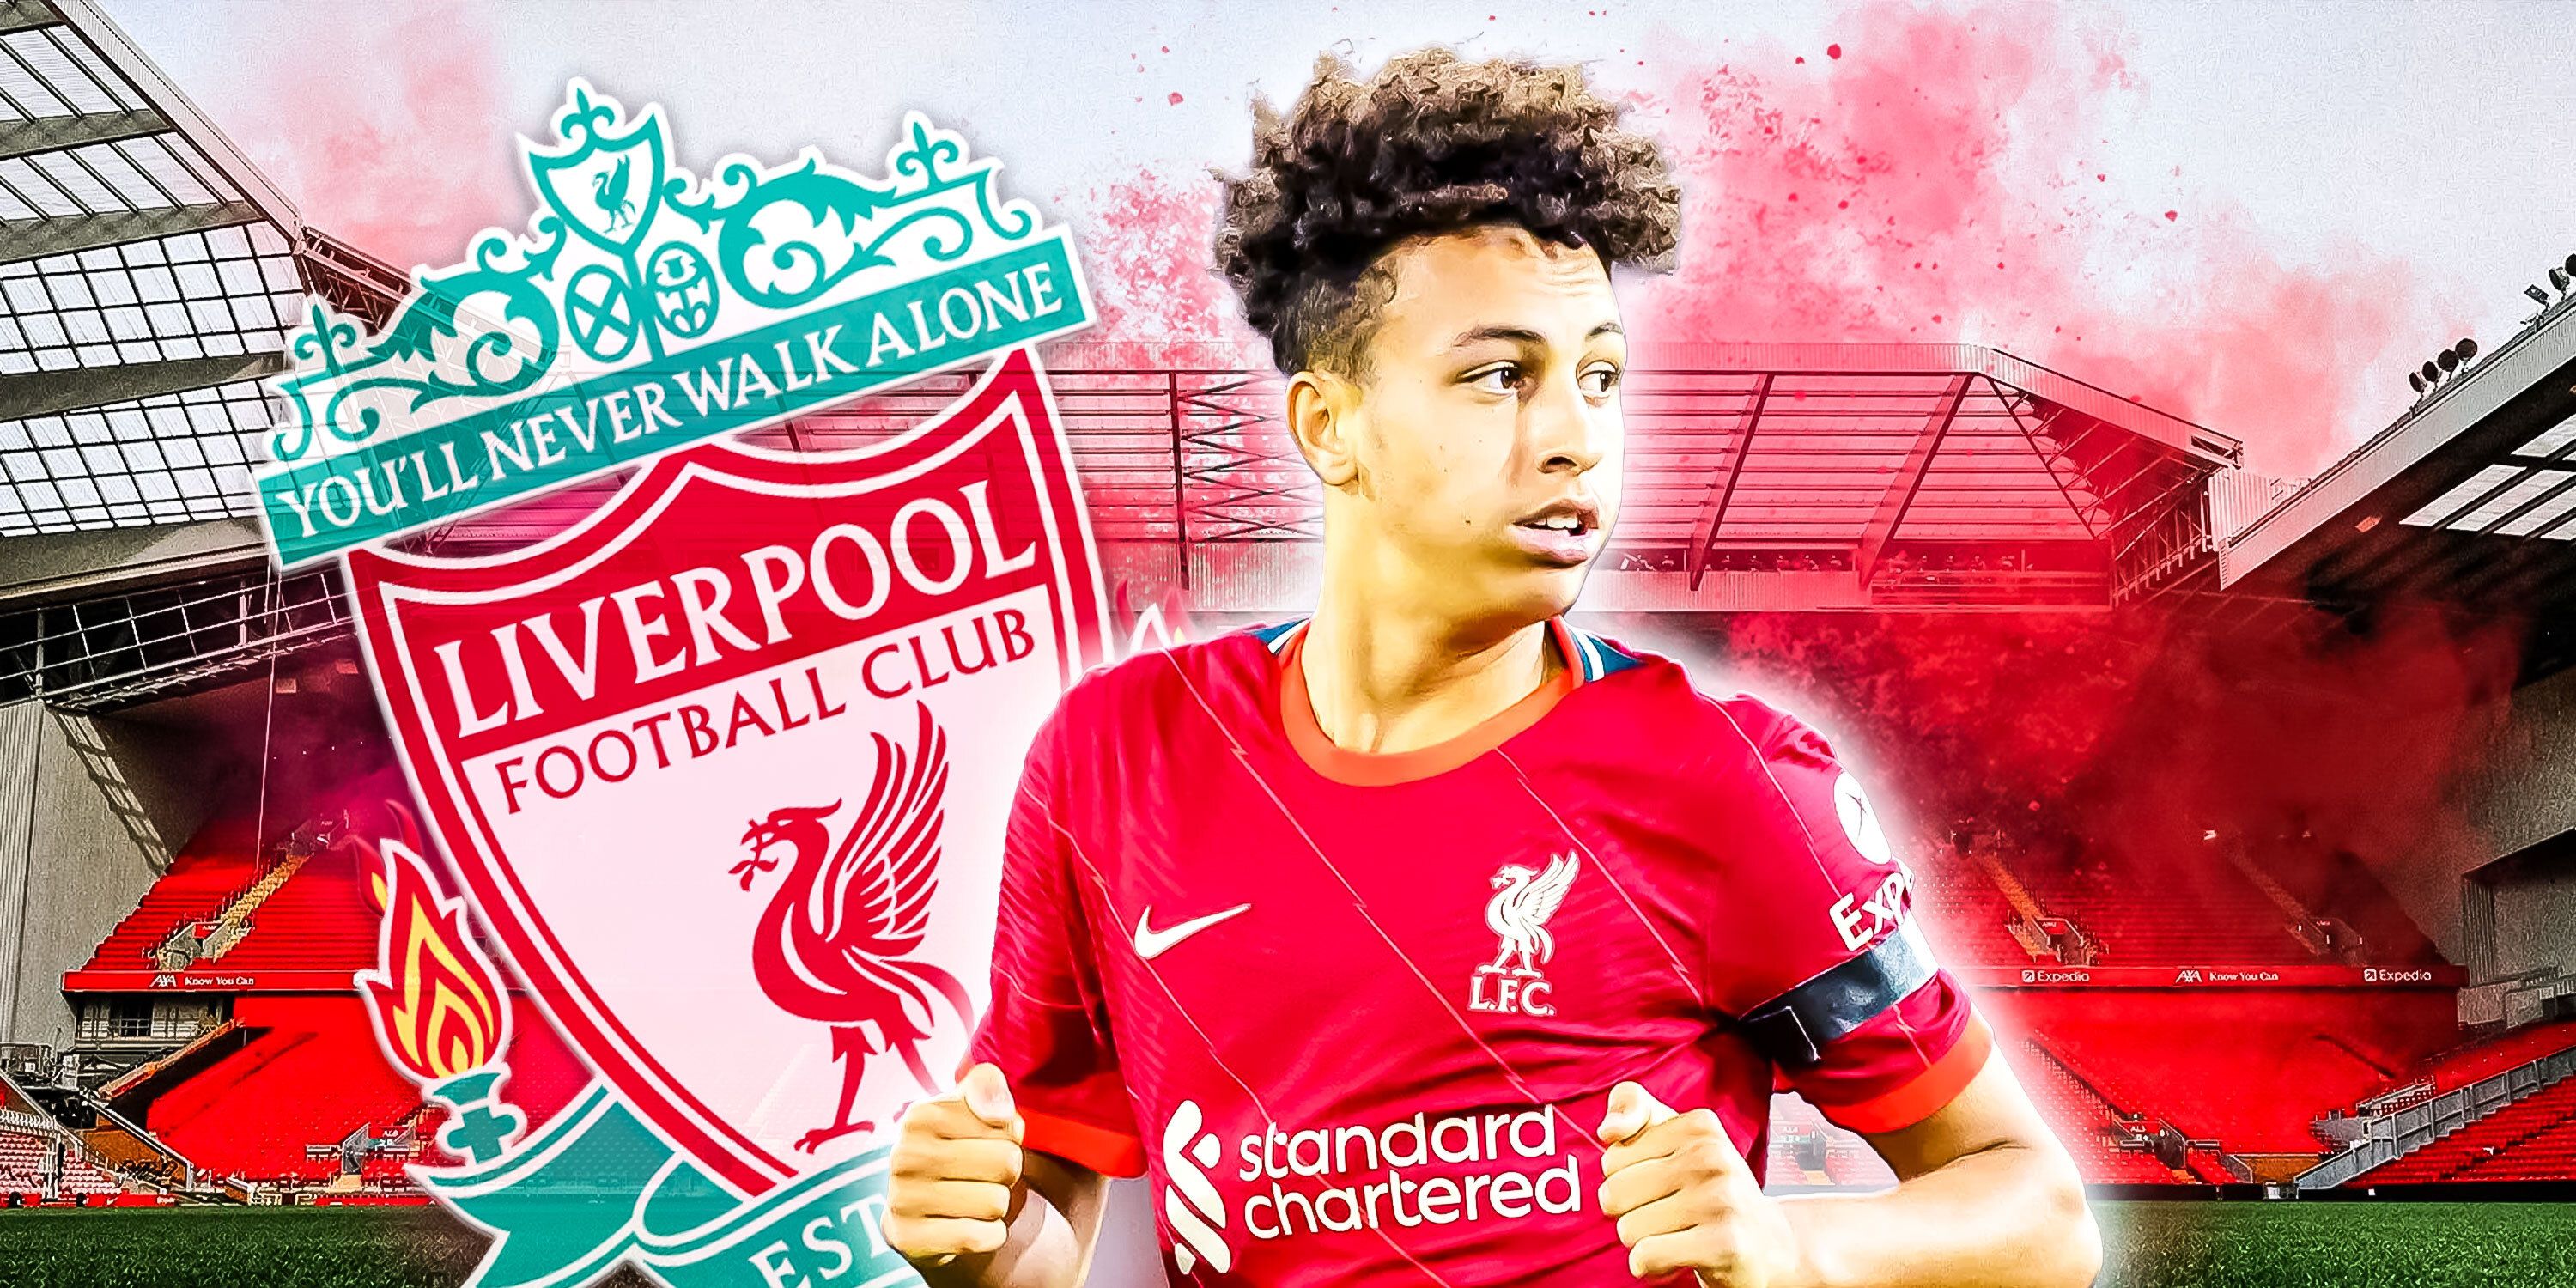 Liverpool academy star Kaide Gordon with the Liverpool badge and Anfield as the background